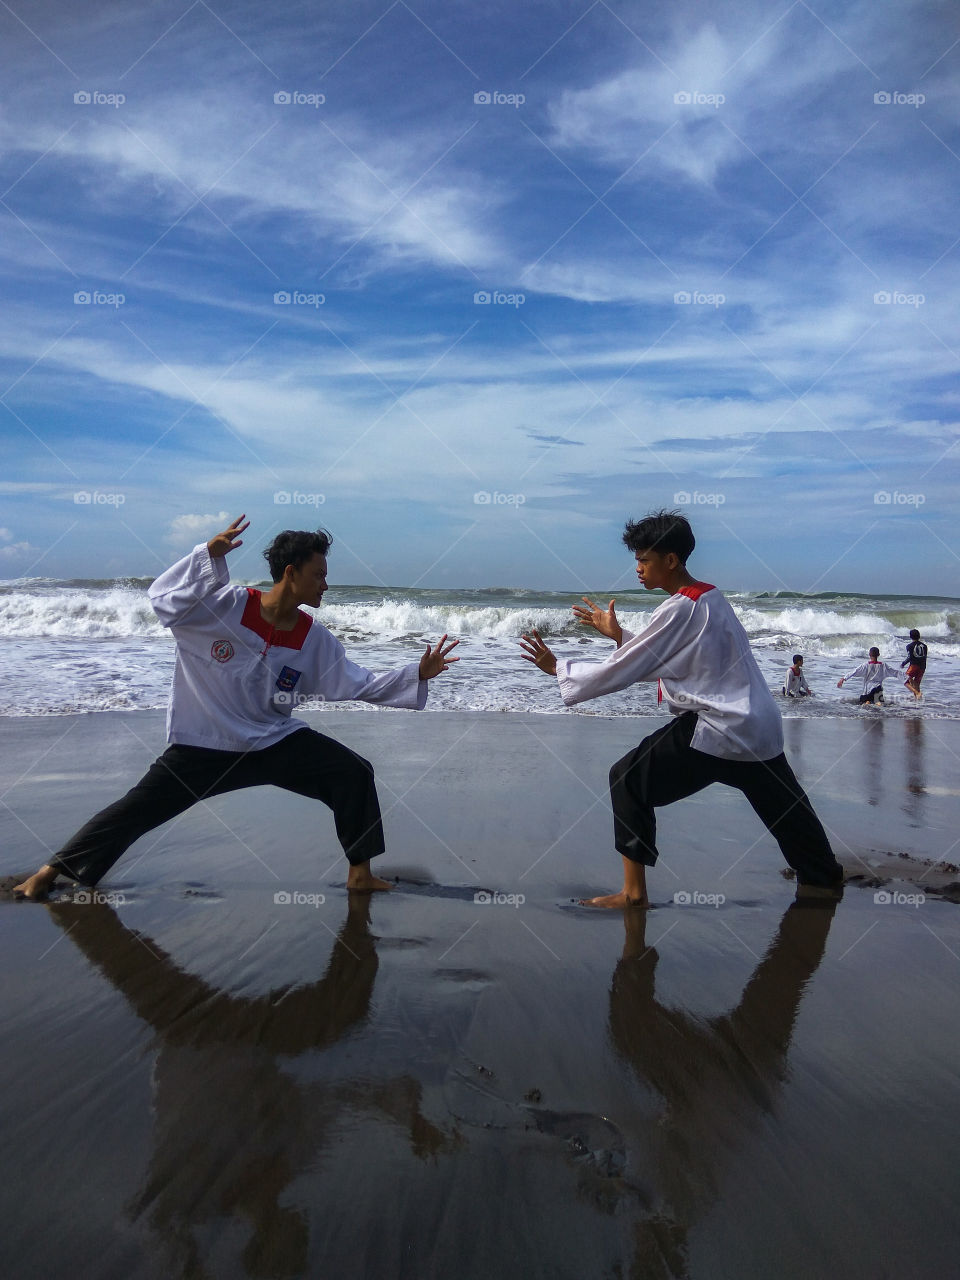 Understanding Pencak Silat in Indonesia, pencak silat is a traditional martial arts originating from the archipelago, and pencak silat is part of the culture of the Indonesian nation developed in line with the history of Indonesian society